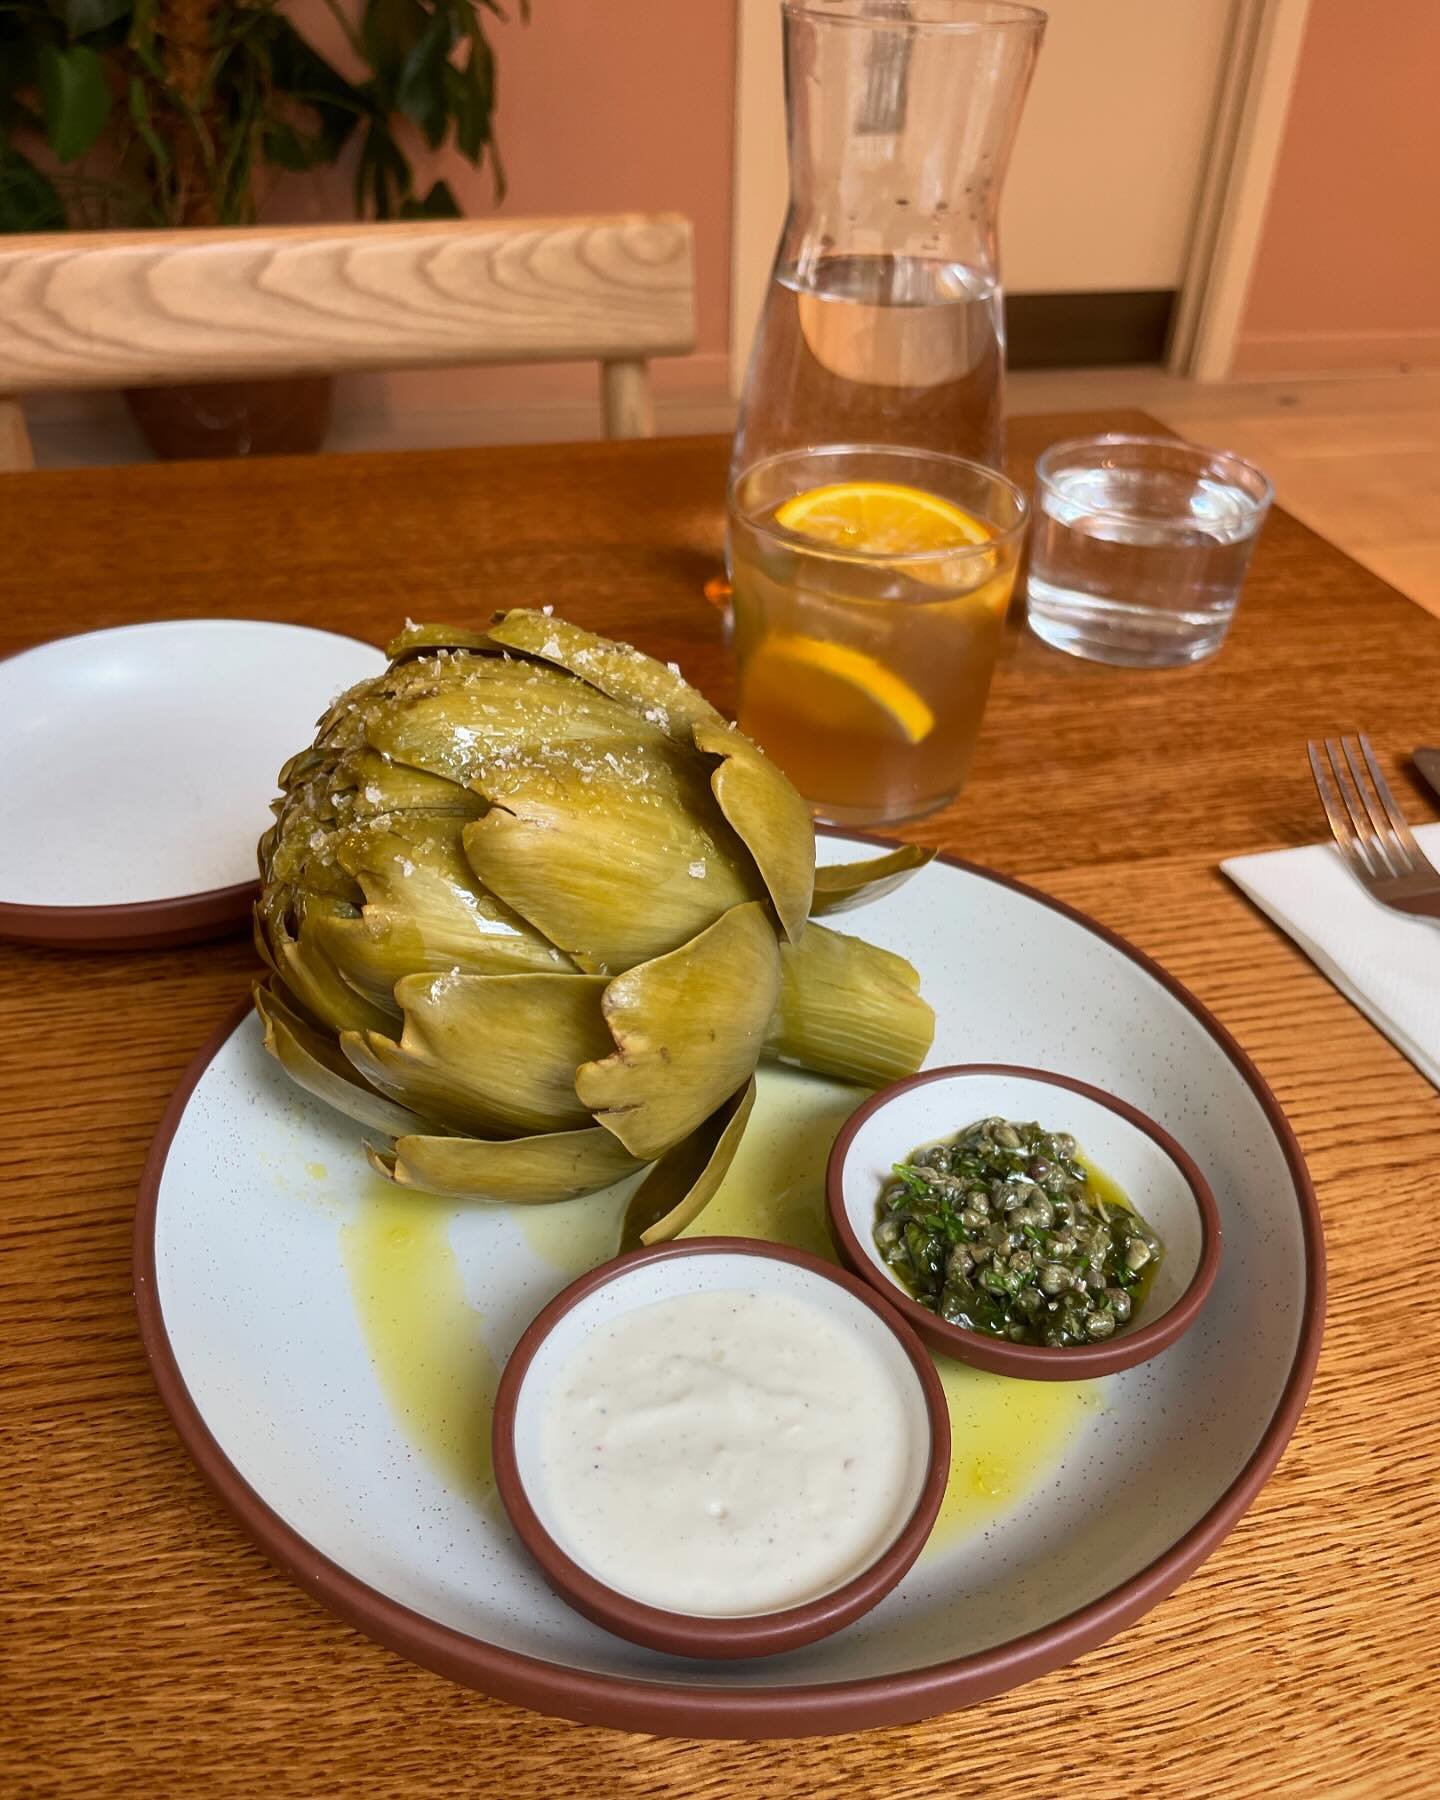 Had the most gorgeously executed artichoke for lunch at @honeyandco Daily! When I saw they had this seasonal delight I hightailed my ass straight over. Artichoke has always had me in a chokehold. 

I was stunned at first to see I was alone in my arti